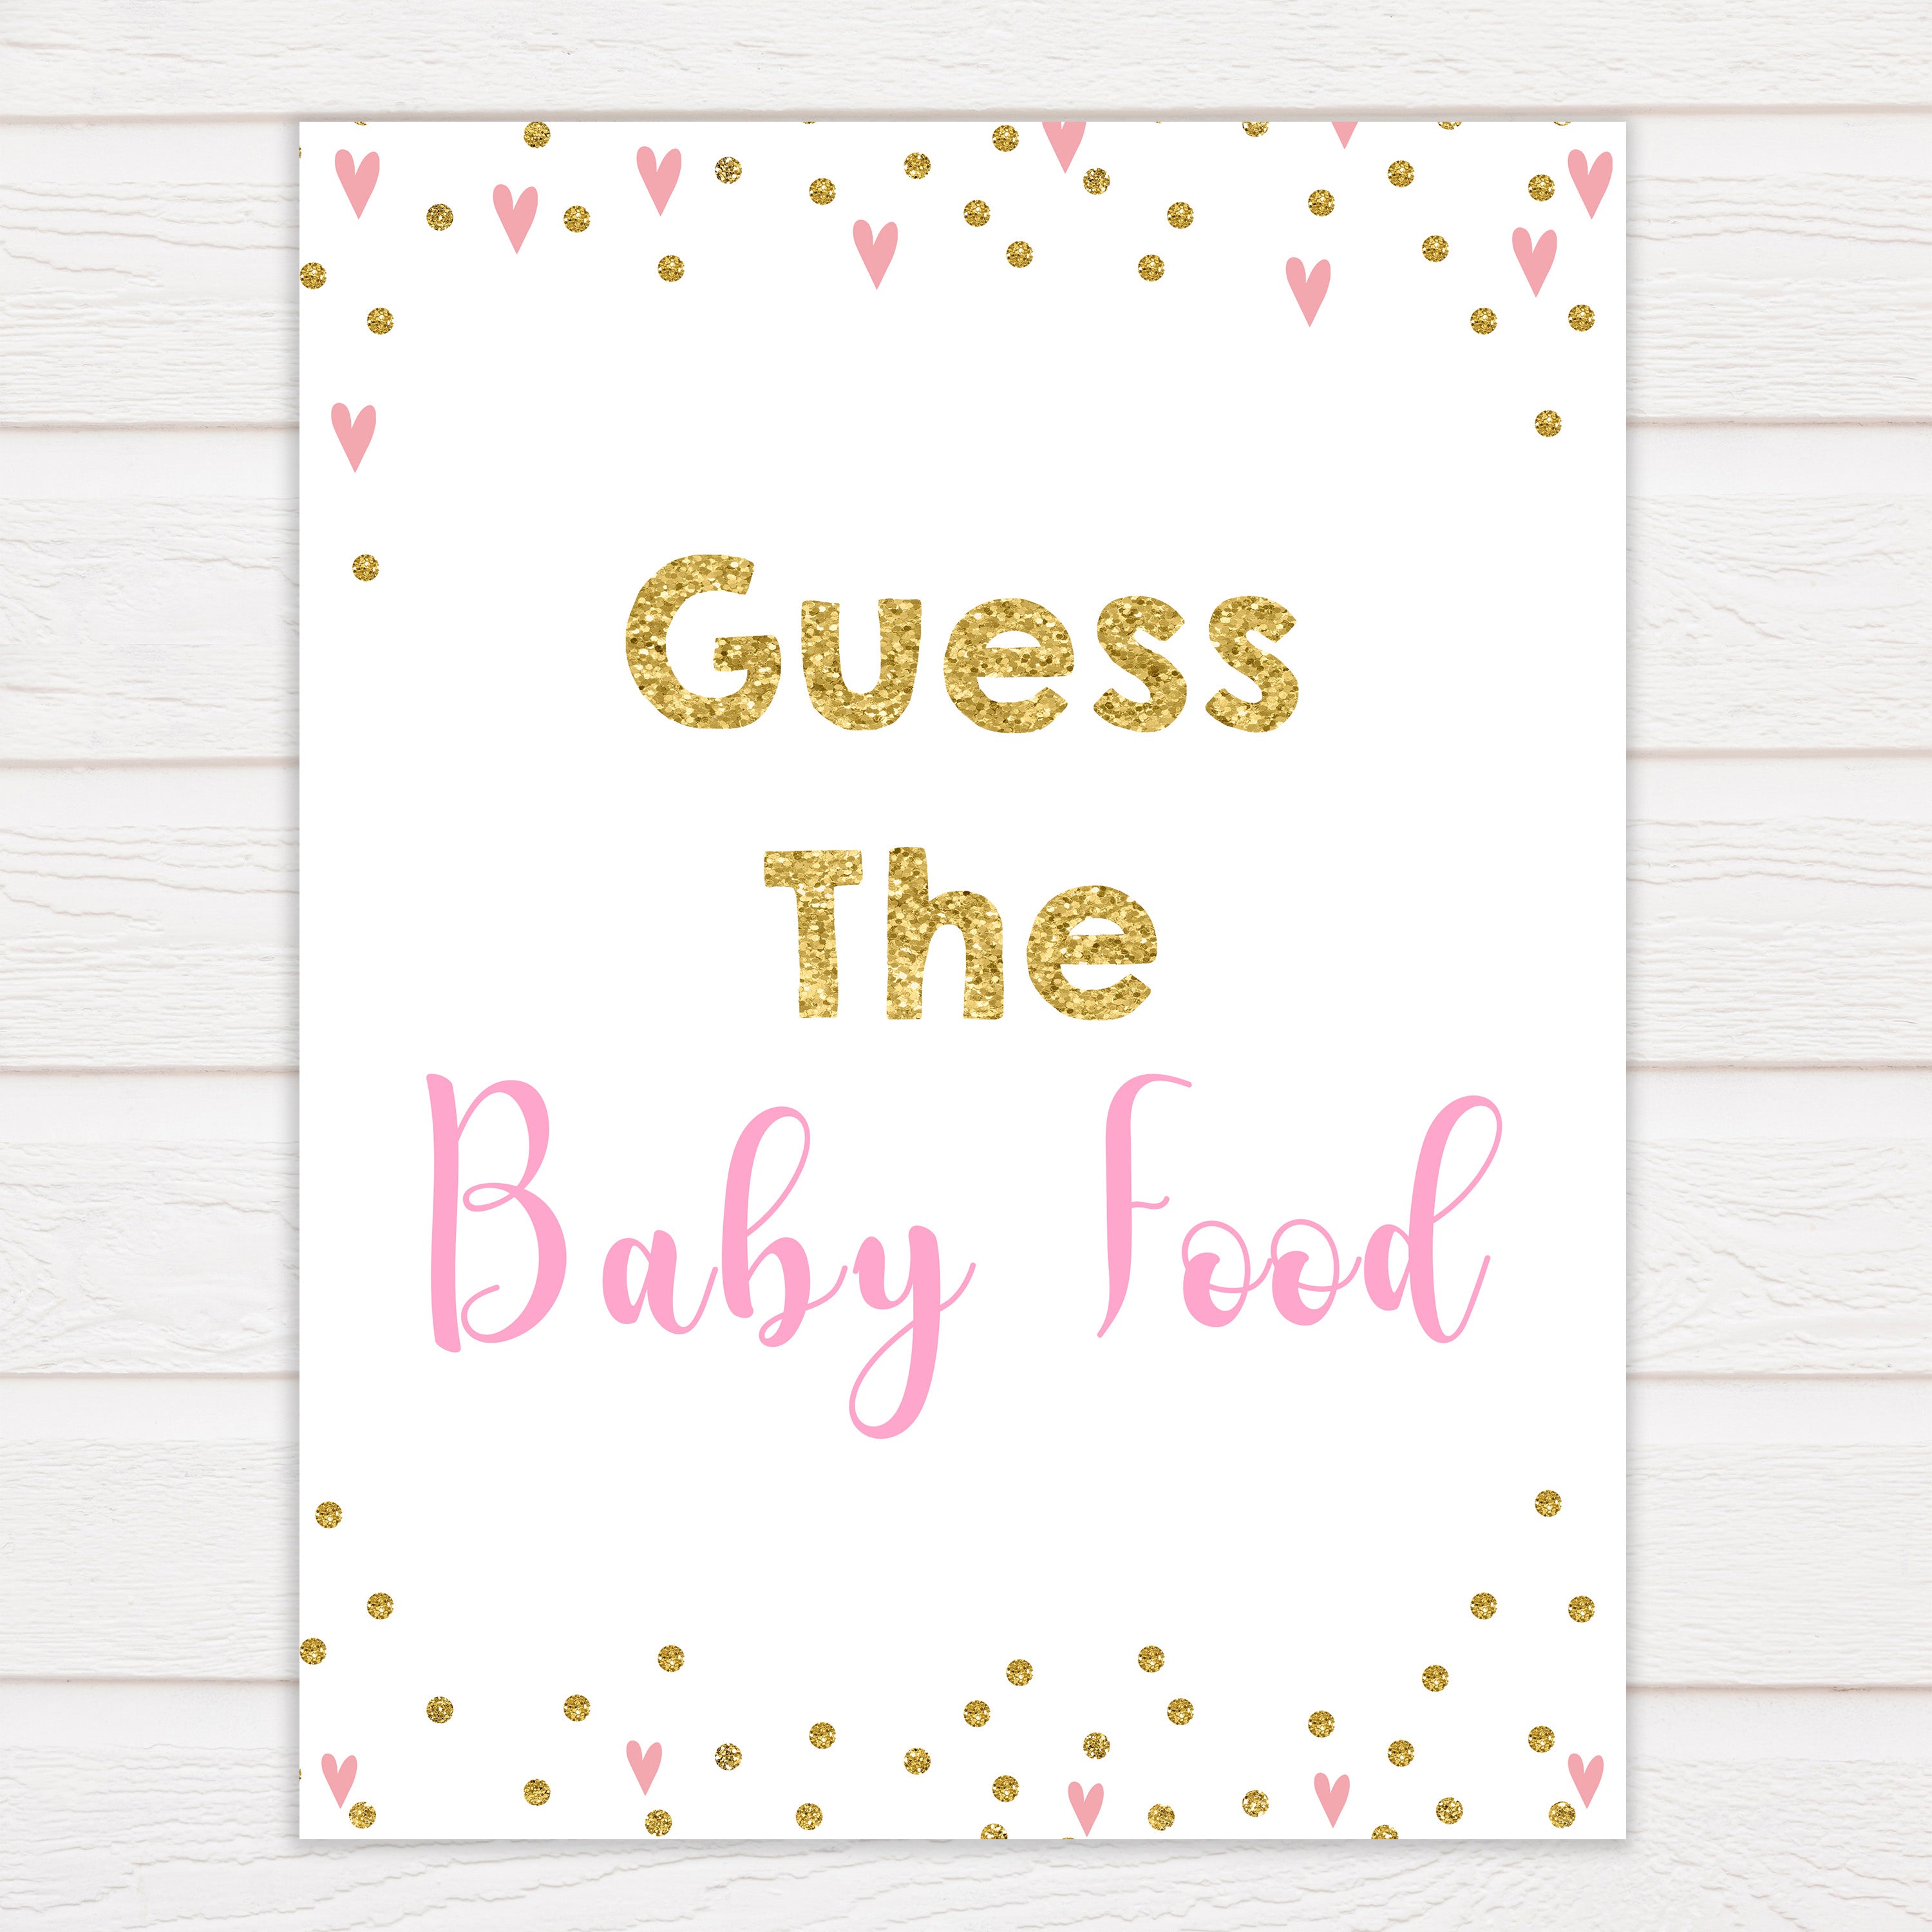 pink hearts baby shower, guess the baby food baby game, printable baby games, pink baby games, girl baby games, top 10 baby games, fun baby games